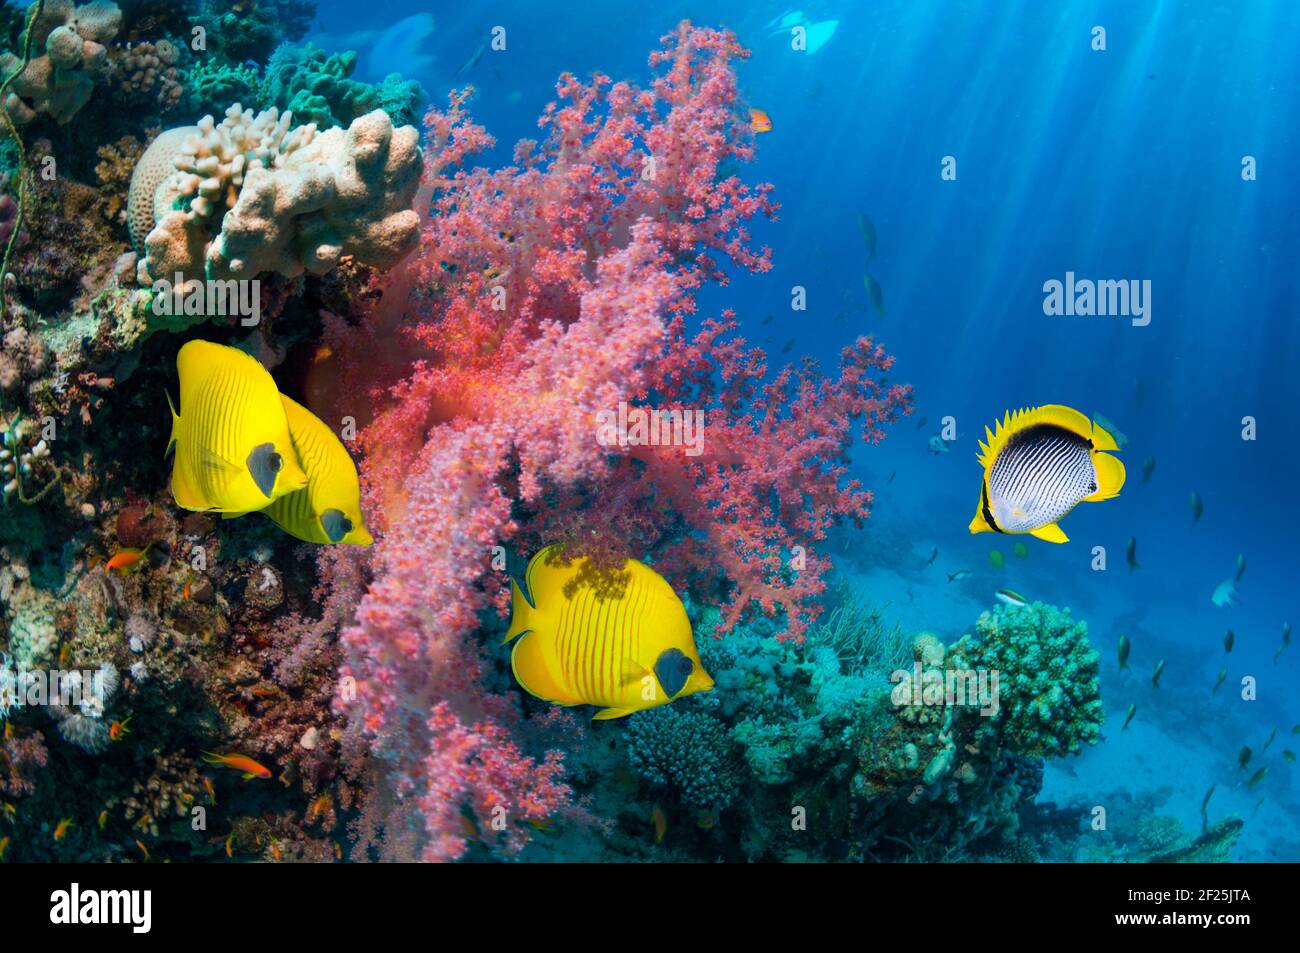 Golden butterflyfish [Chaetodon semilarvatus], Black-backed butterflyfish [Chaetodon melanotus] on coral reef with soft coral [Dendronephthya sp.].  E Stock Photo